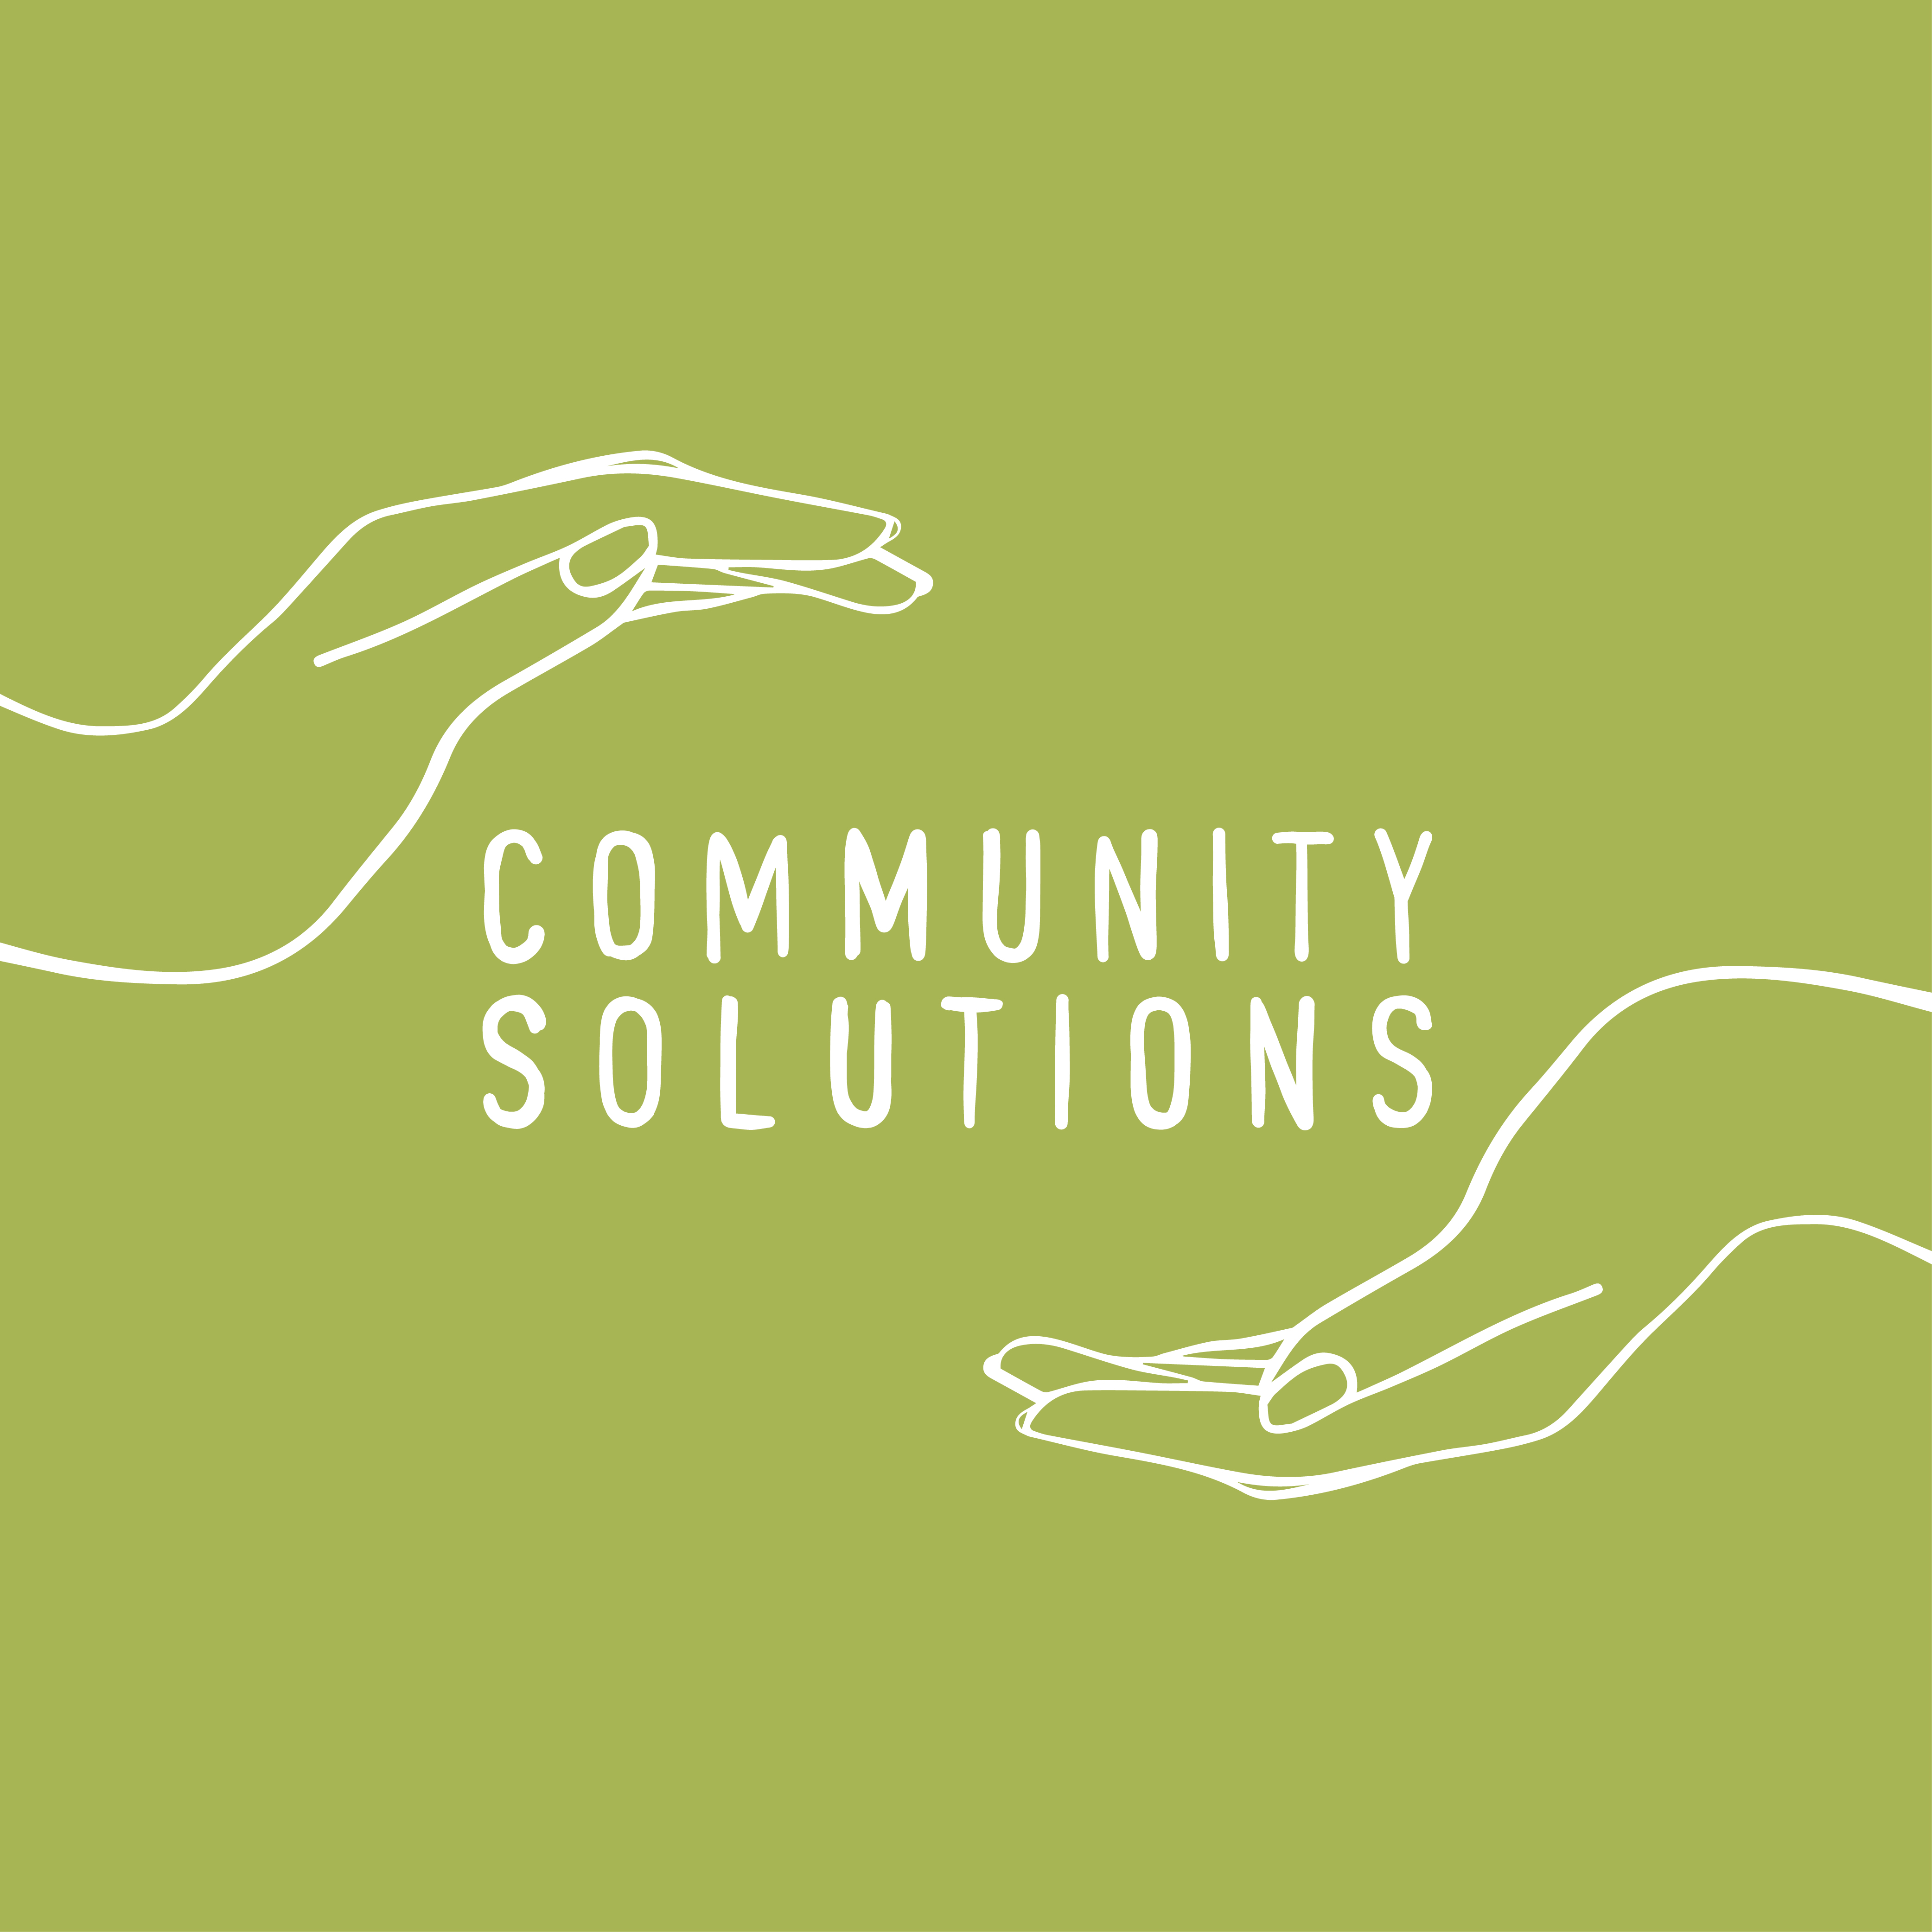 Episode 20: How to Implement Assets-Based Community Development